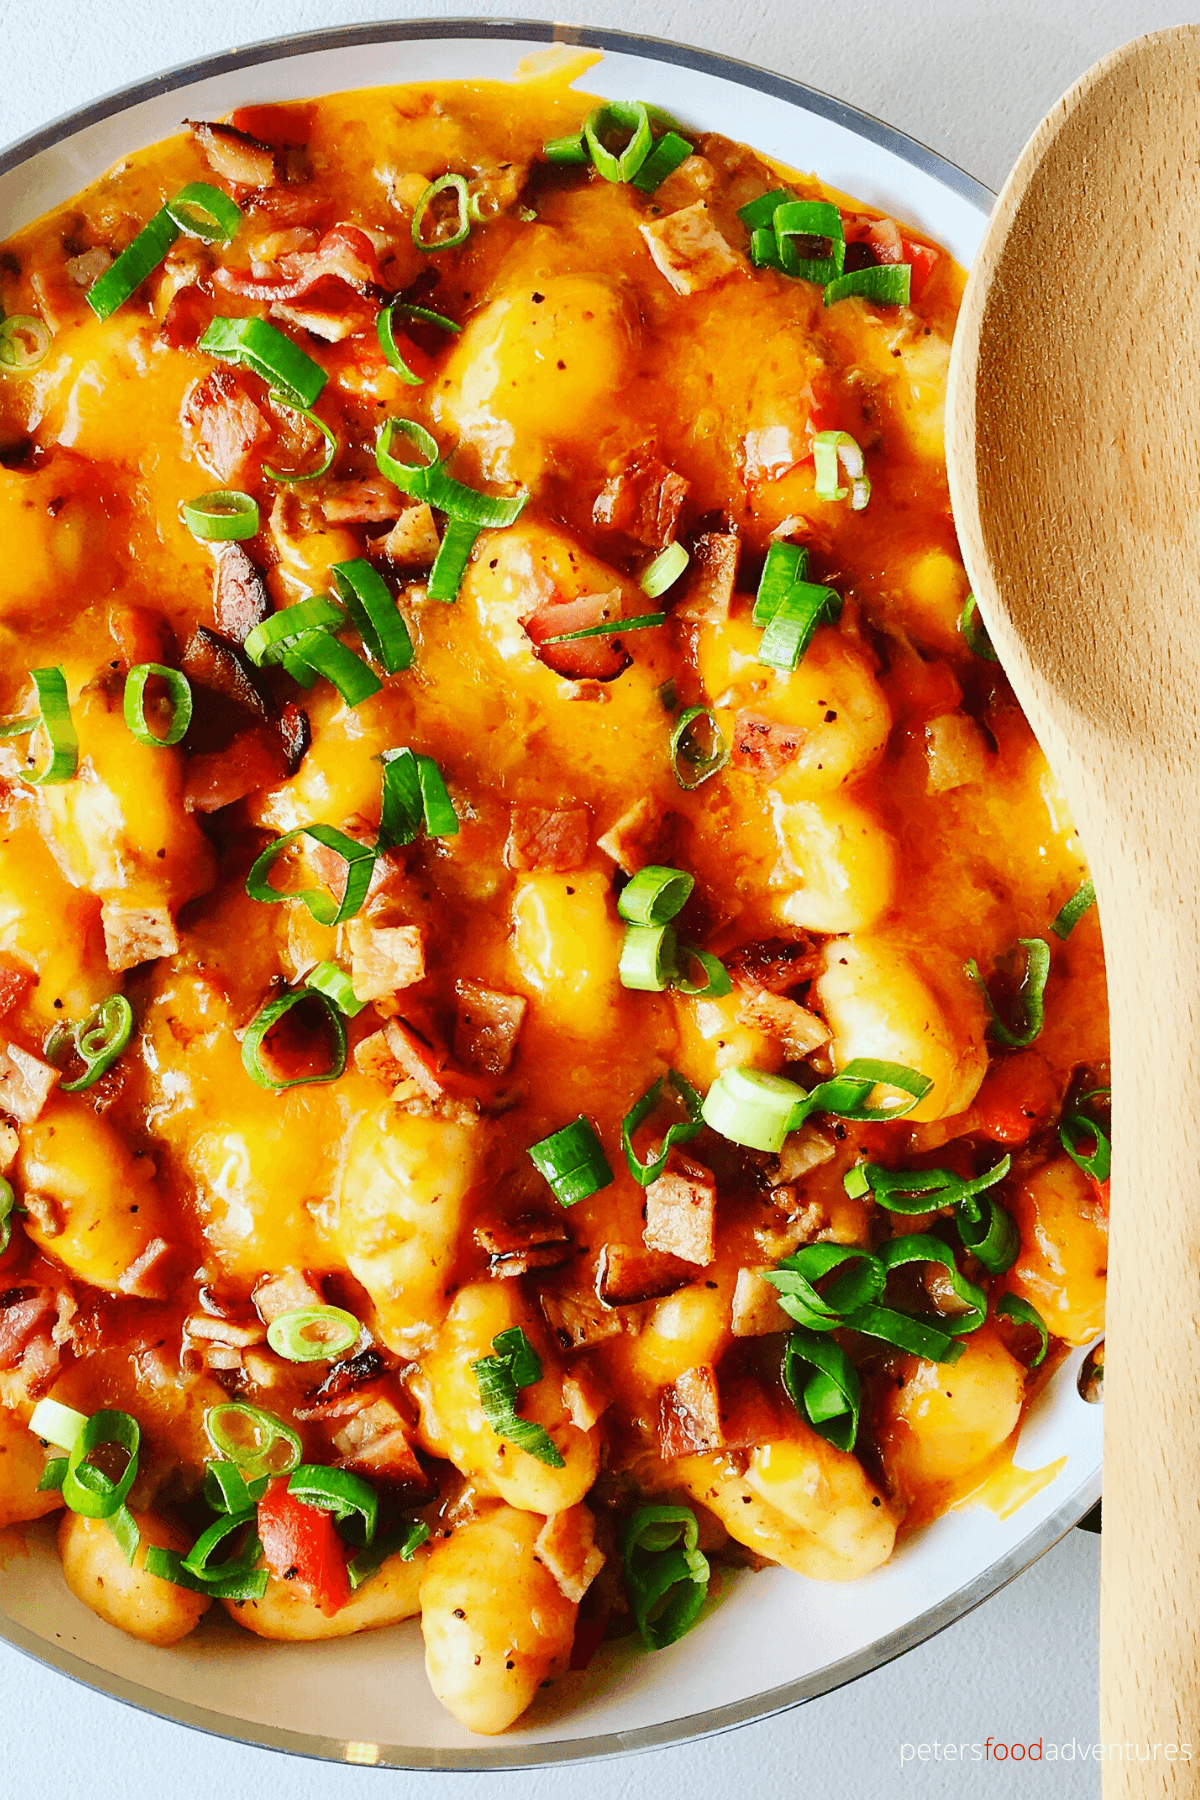 Your kids will LOVE this! The only way to eat gnocchi, an easy one pot wonder! Cheeseburger inspired with seasoned ground beef, bacon, tomatoes, red peppers, gooey melted cheddar cheese. Bacon Cheeseburger Gnocchi